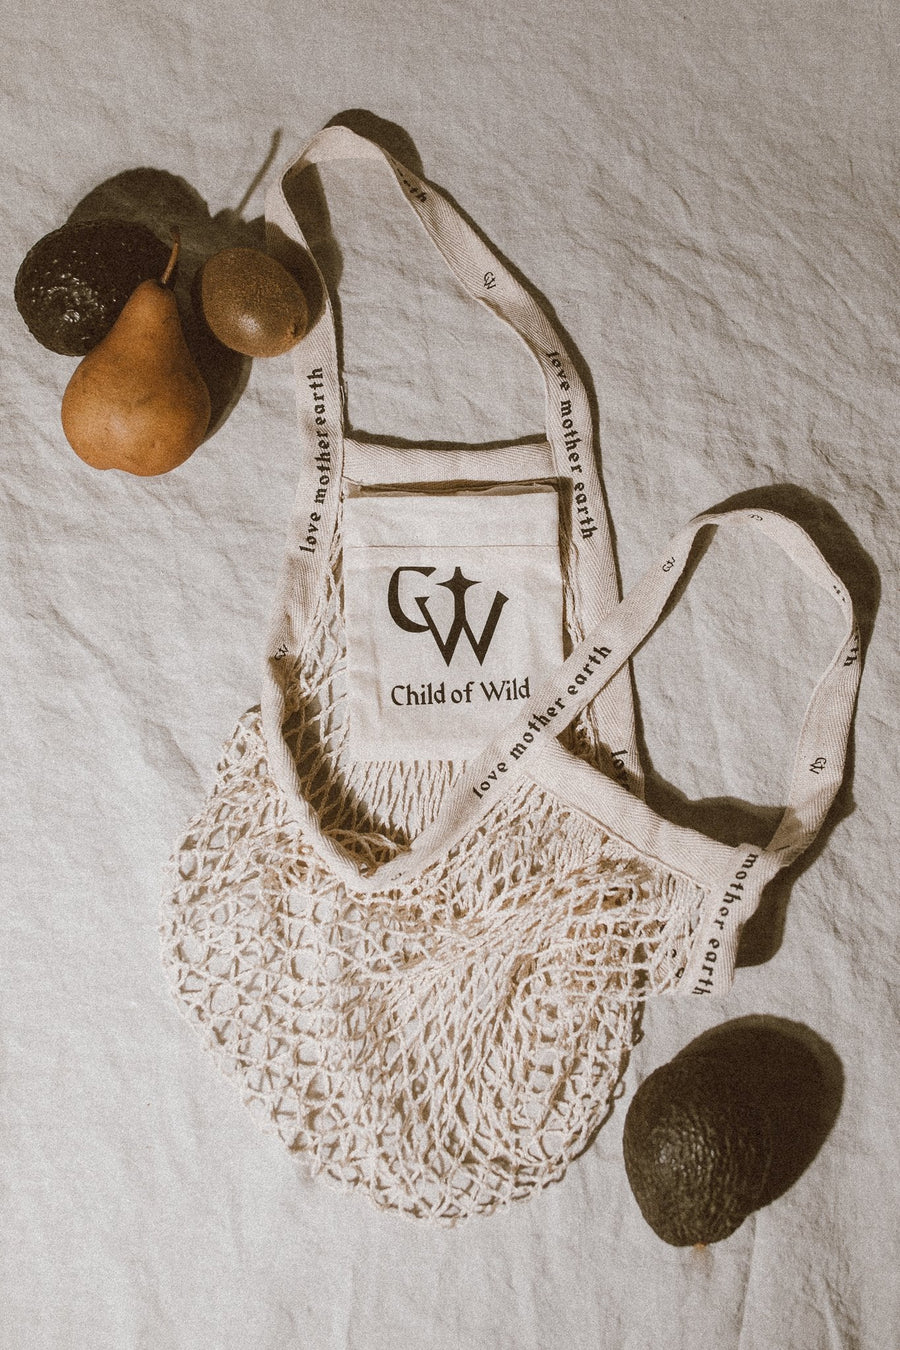 Child of Wild Objects White / FINAL SALE CW Cotton Eco-Tote